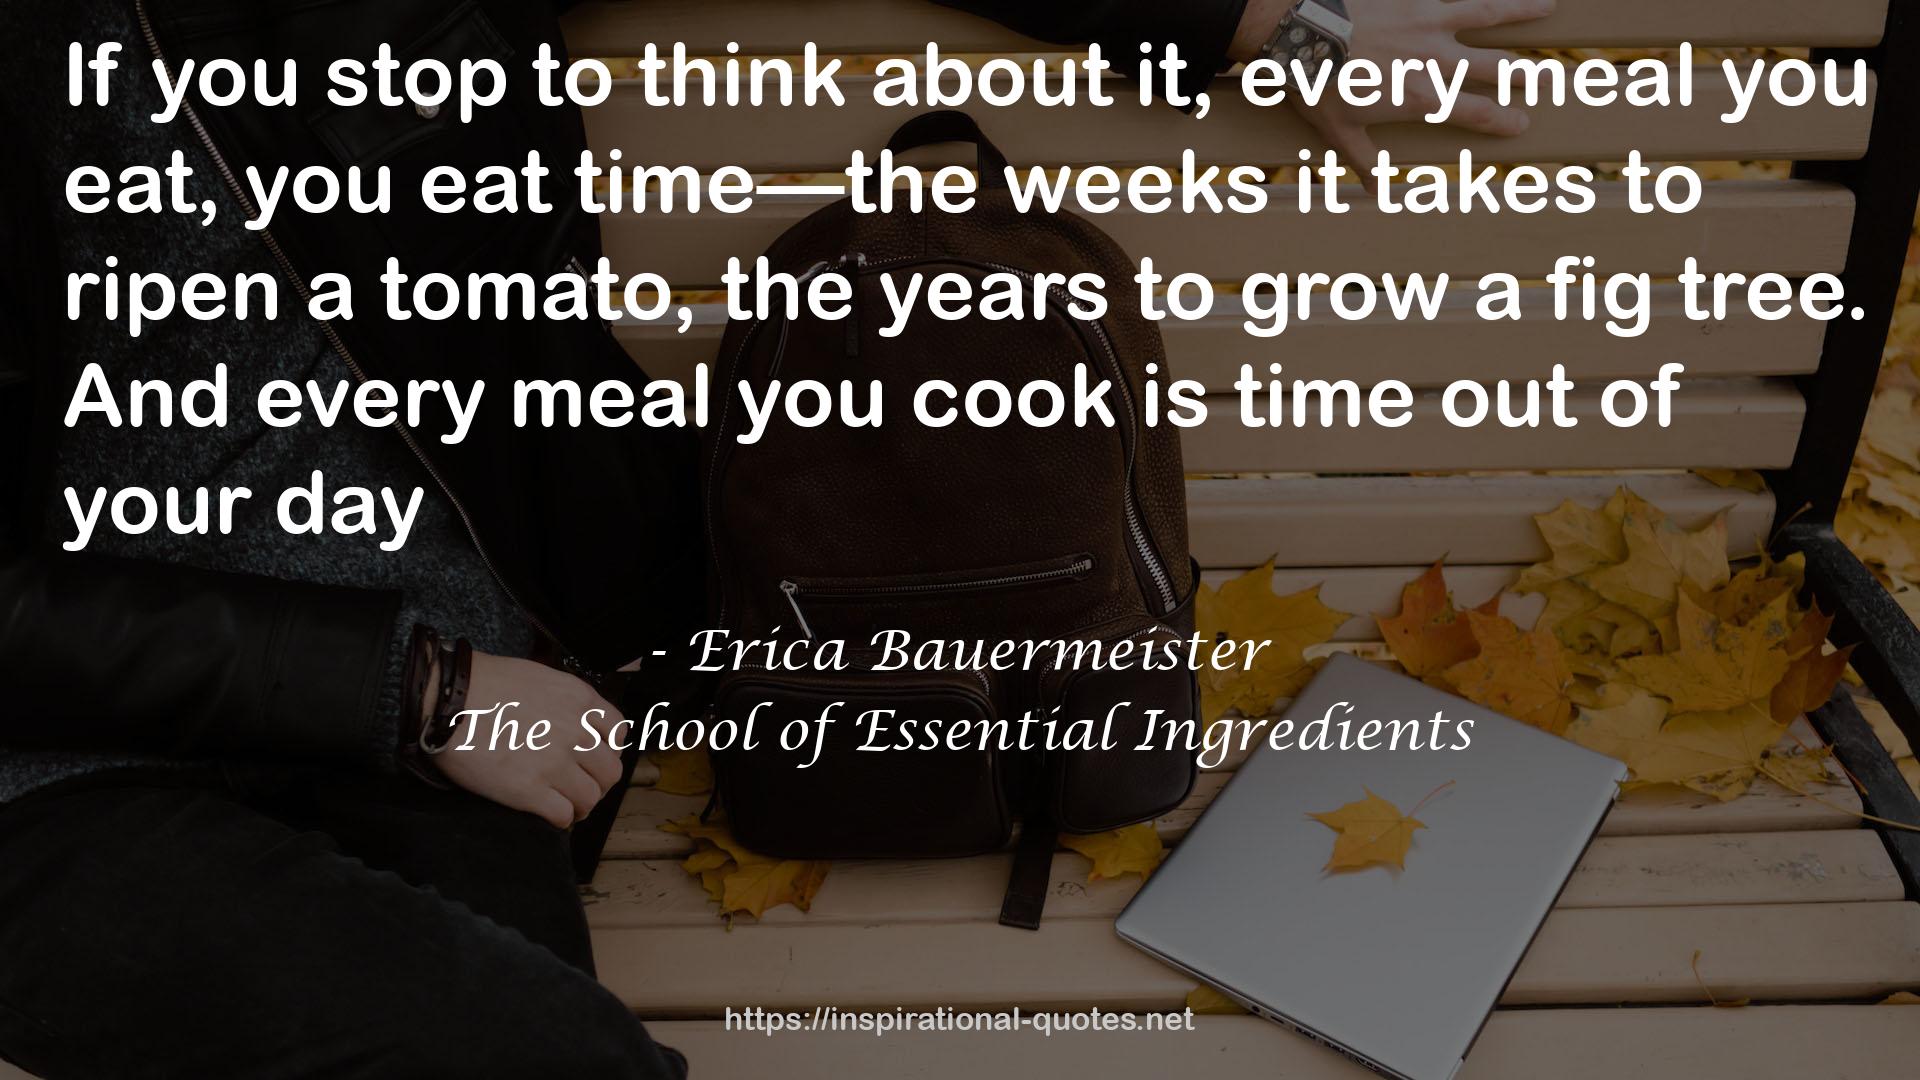 The School of Essential Ingredients QUOTES